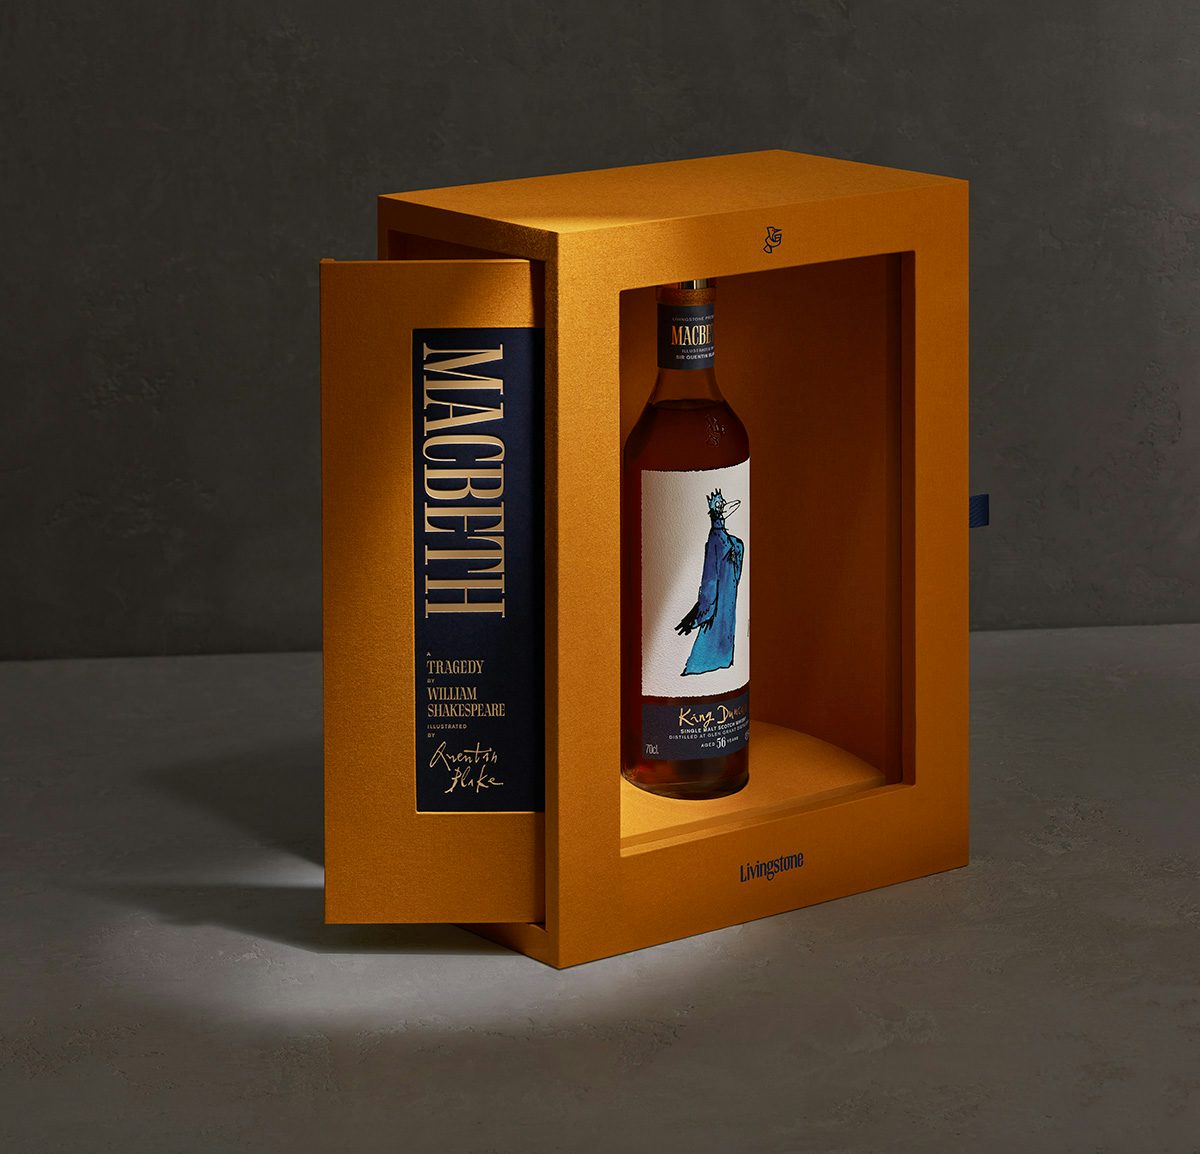 Photograph of a bottle in the Macbeth whisky collection featuring an illustration on the label of King Duncan drawn as a bird by Quentin Blake. The bottle is inside an orange presentation box